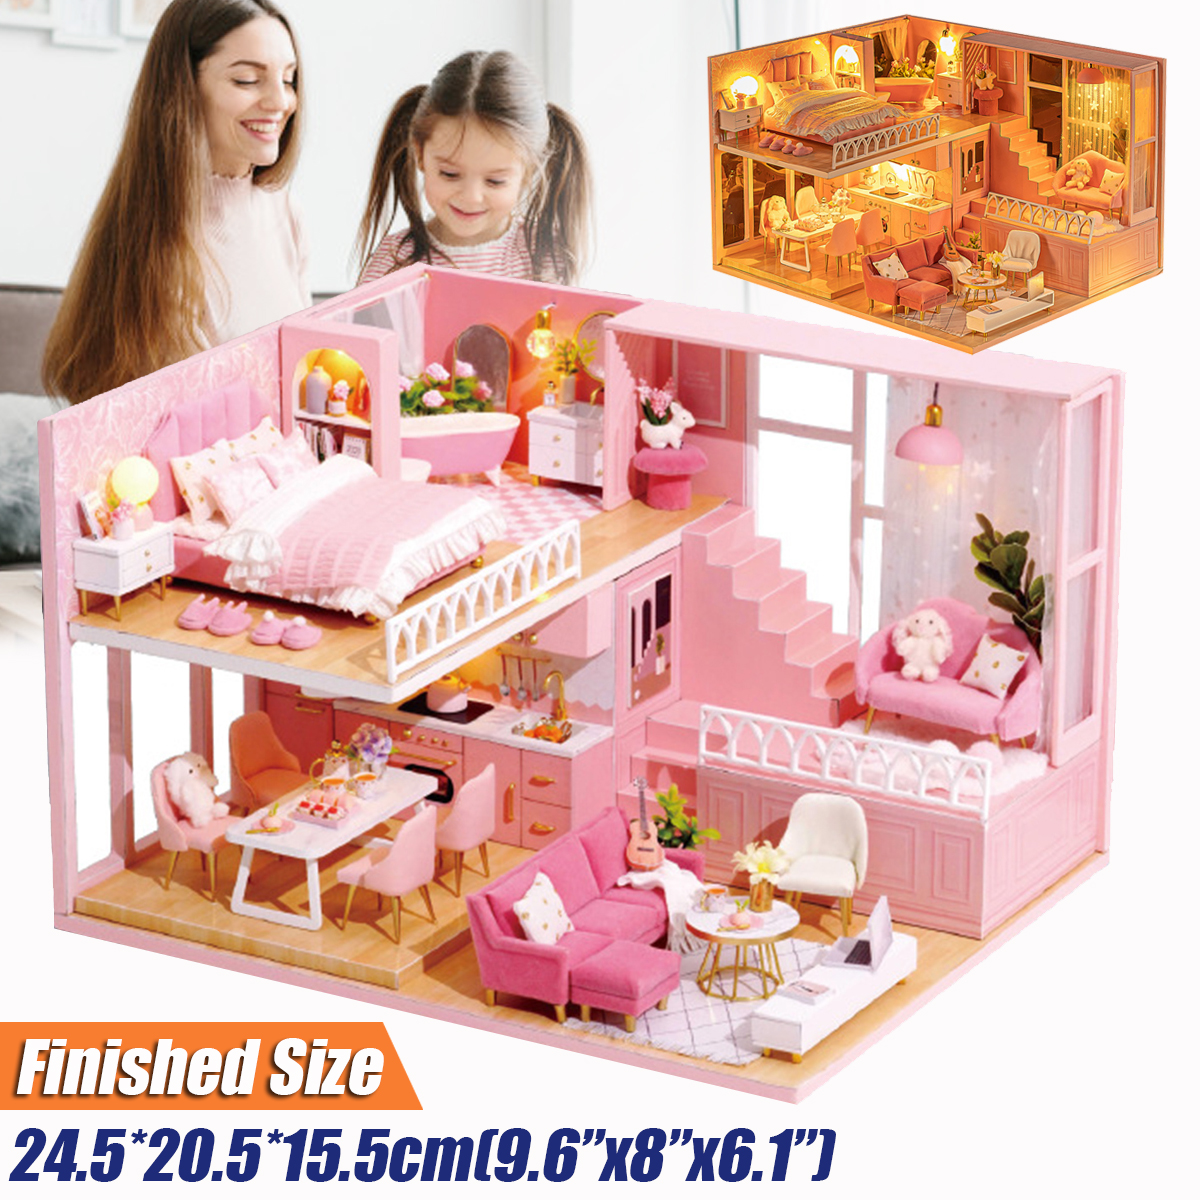 124-Wooden-3D-DIY-Handmade-Assemble-Miniature-Doll-House-Kit-Toy-with-Furniture-for-Kids-Gift-Collec-1730578-1